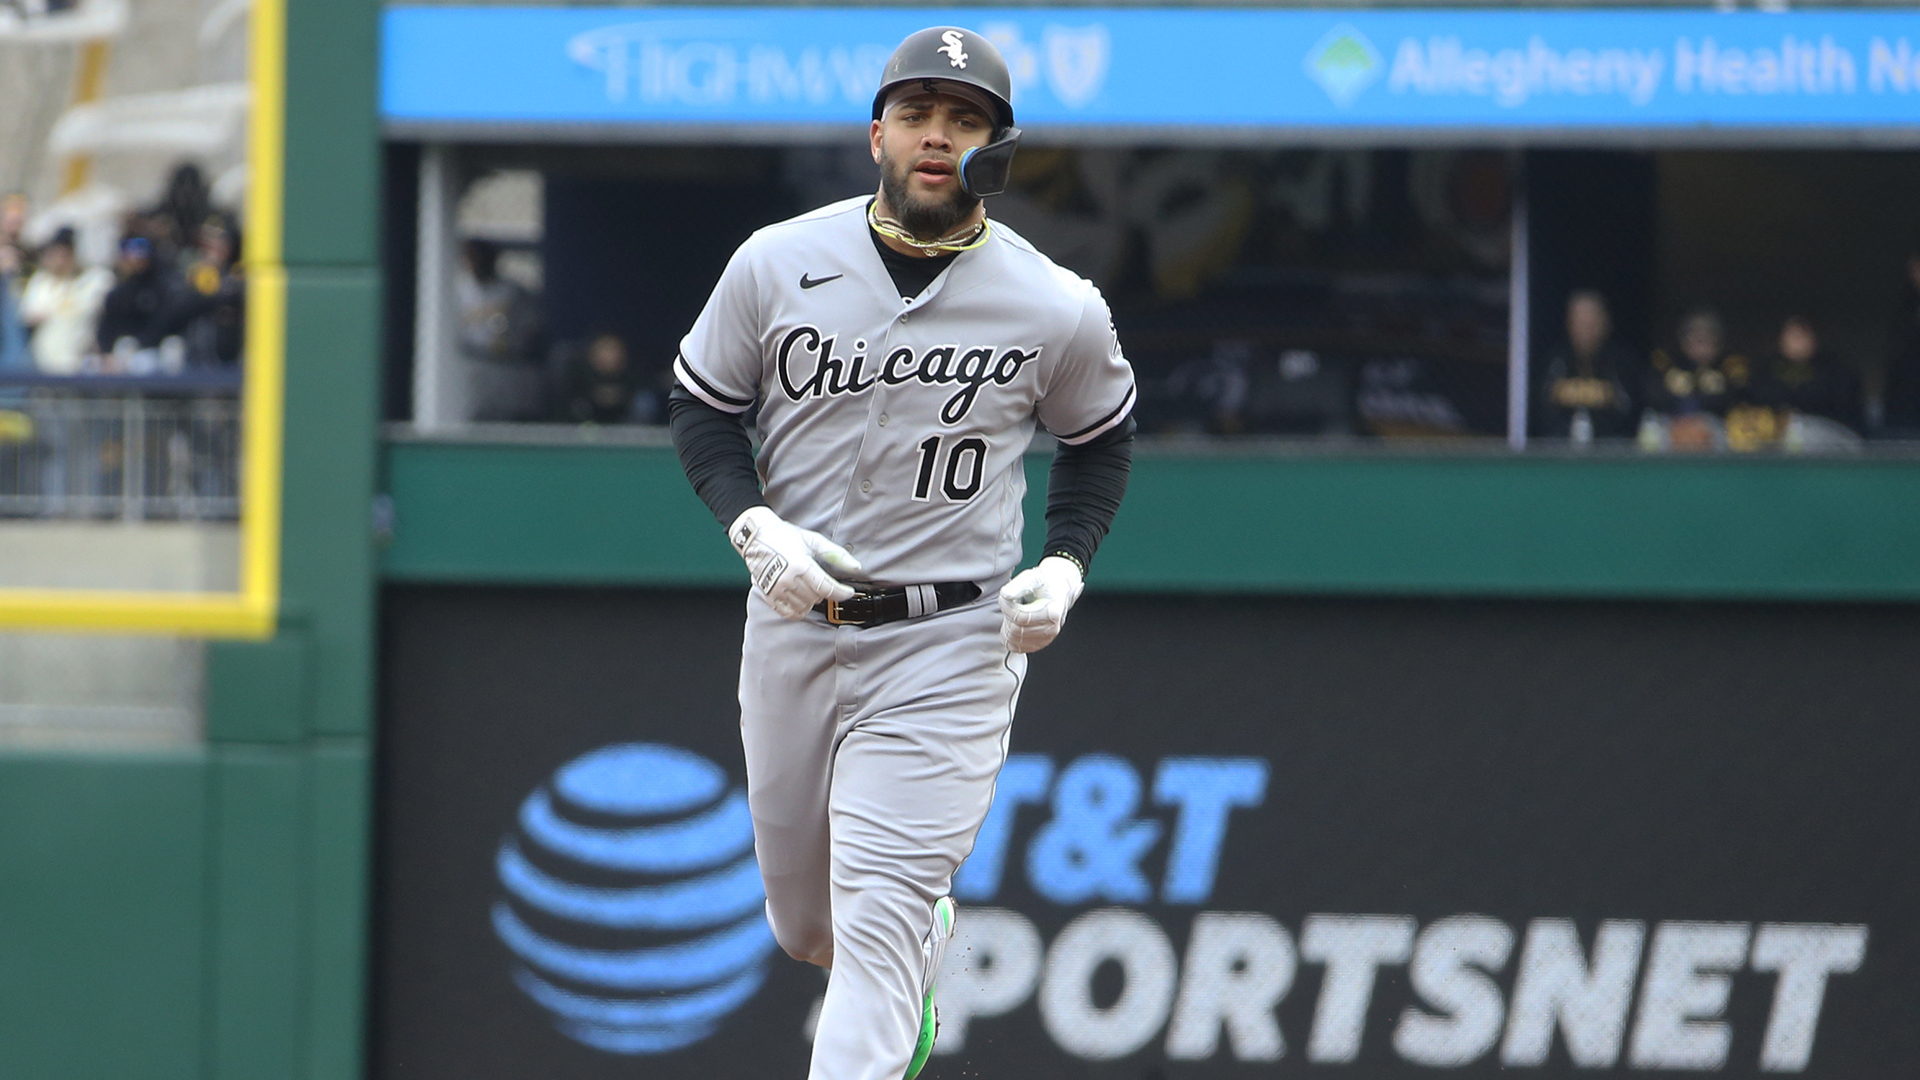 Switch-hitting Yoan Moncada finding the right stuff - Chicago Sun-Times